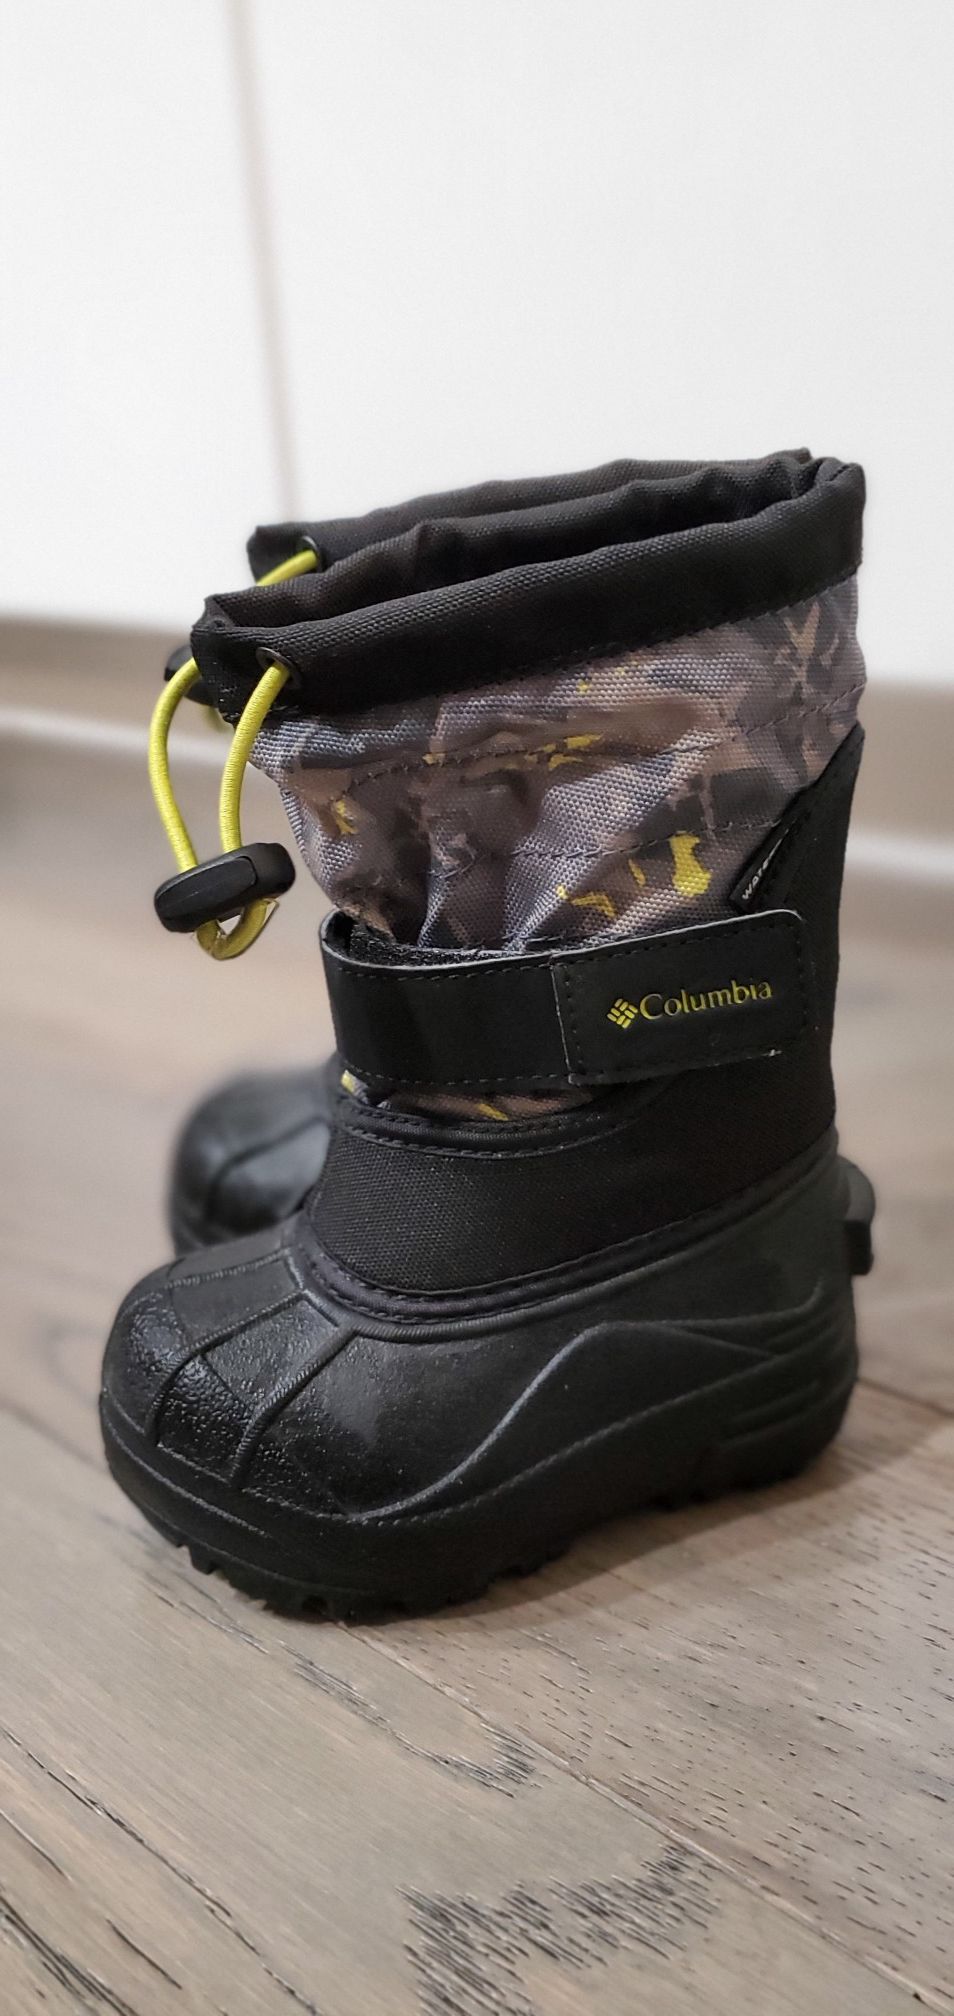 Columbia snow boots (toddler)